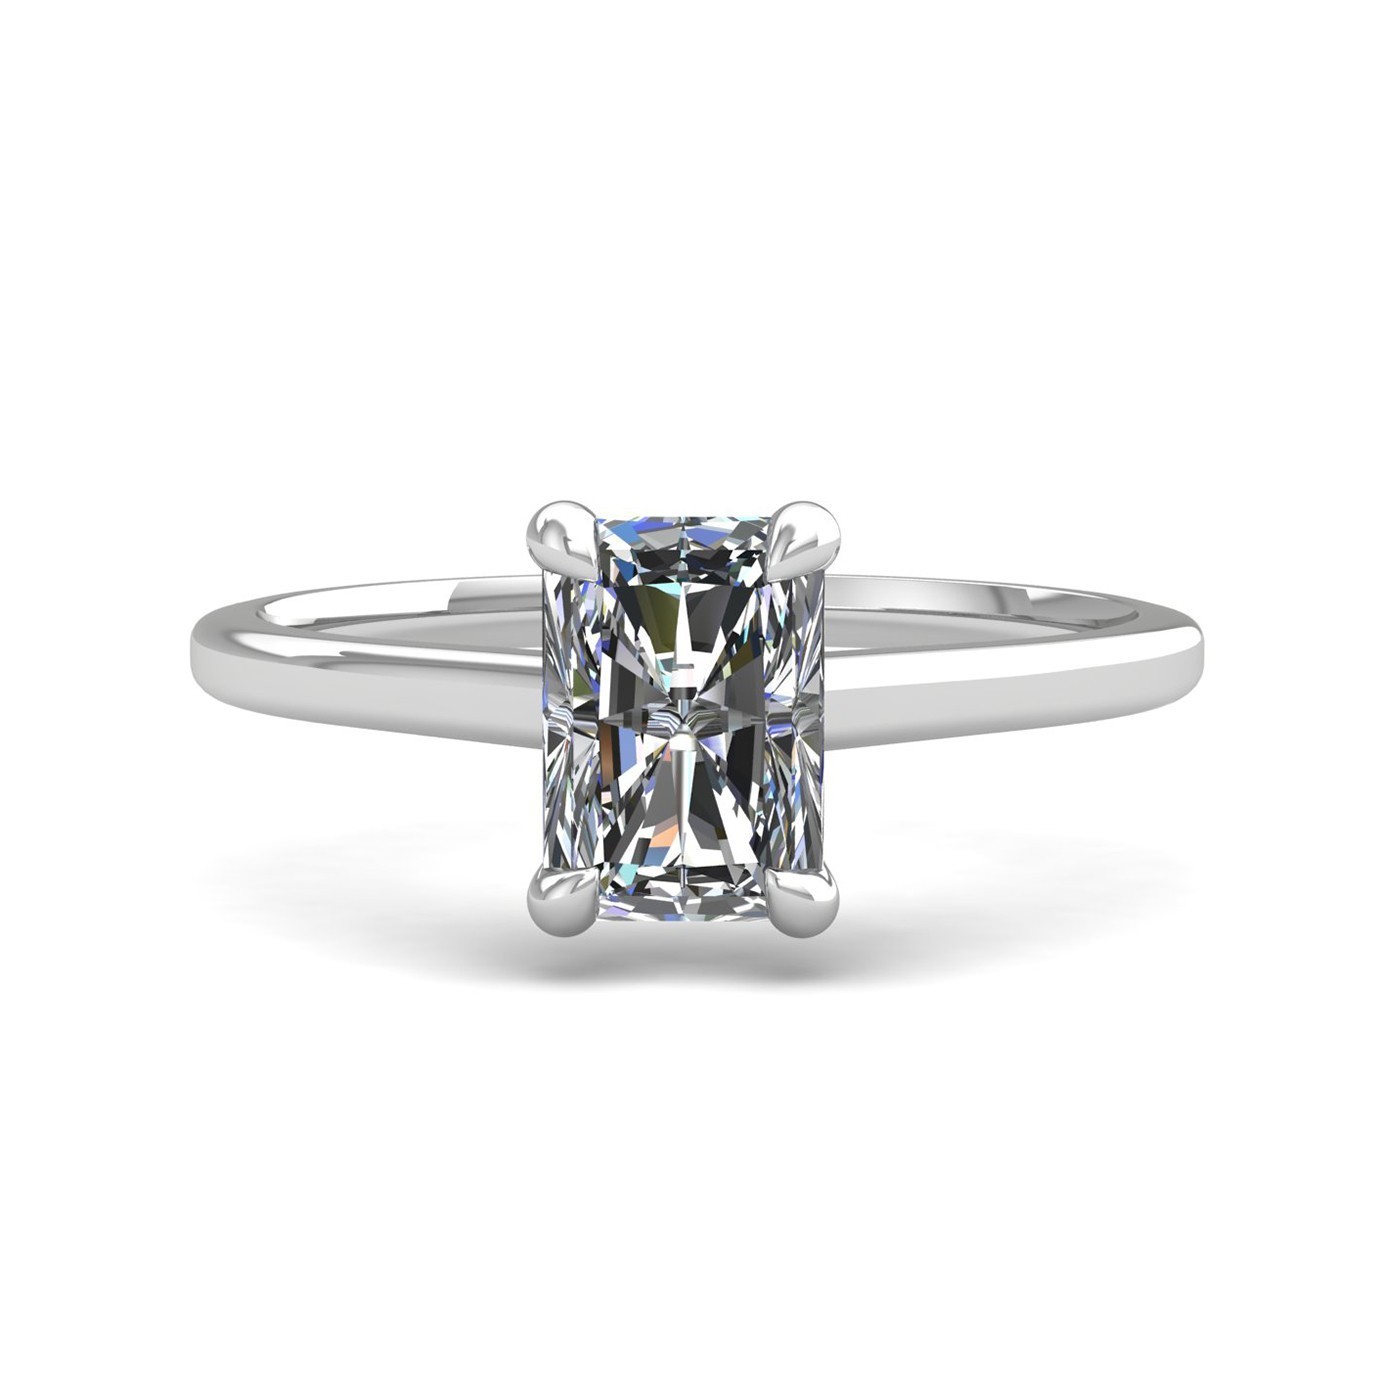 18K WHITE GOLD 4 PRONGS SOLITAIRE RADIANT CUT DIAMOND ENGAGEMENT RING WITH WHISPER THIN BAND